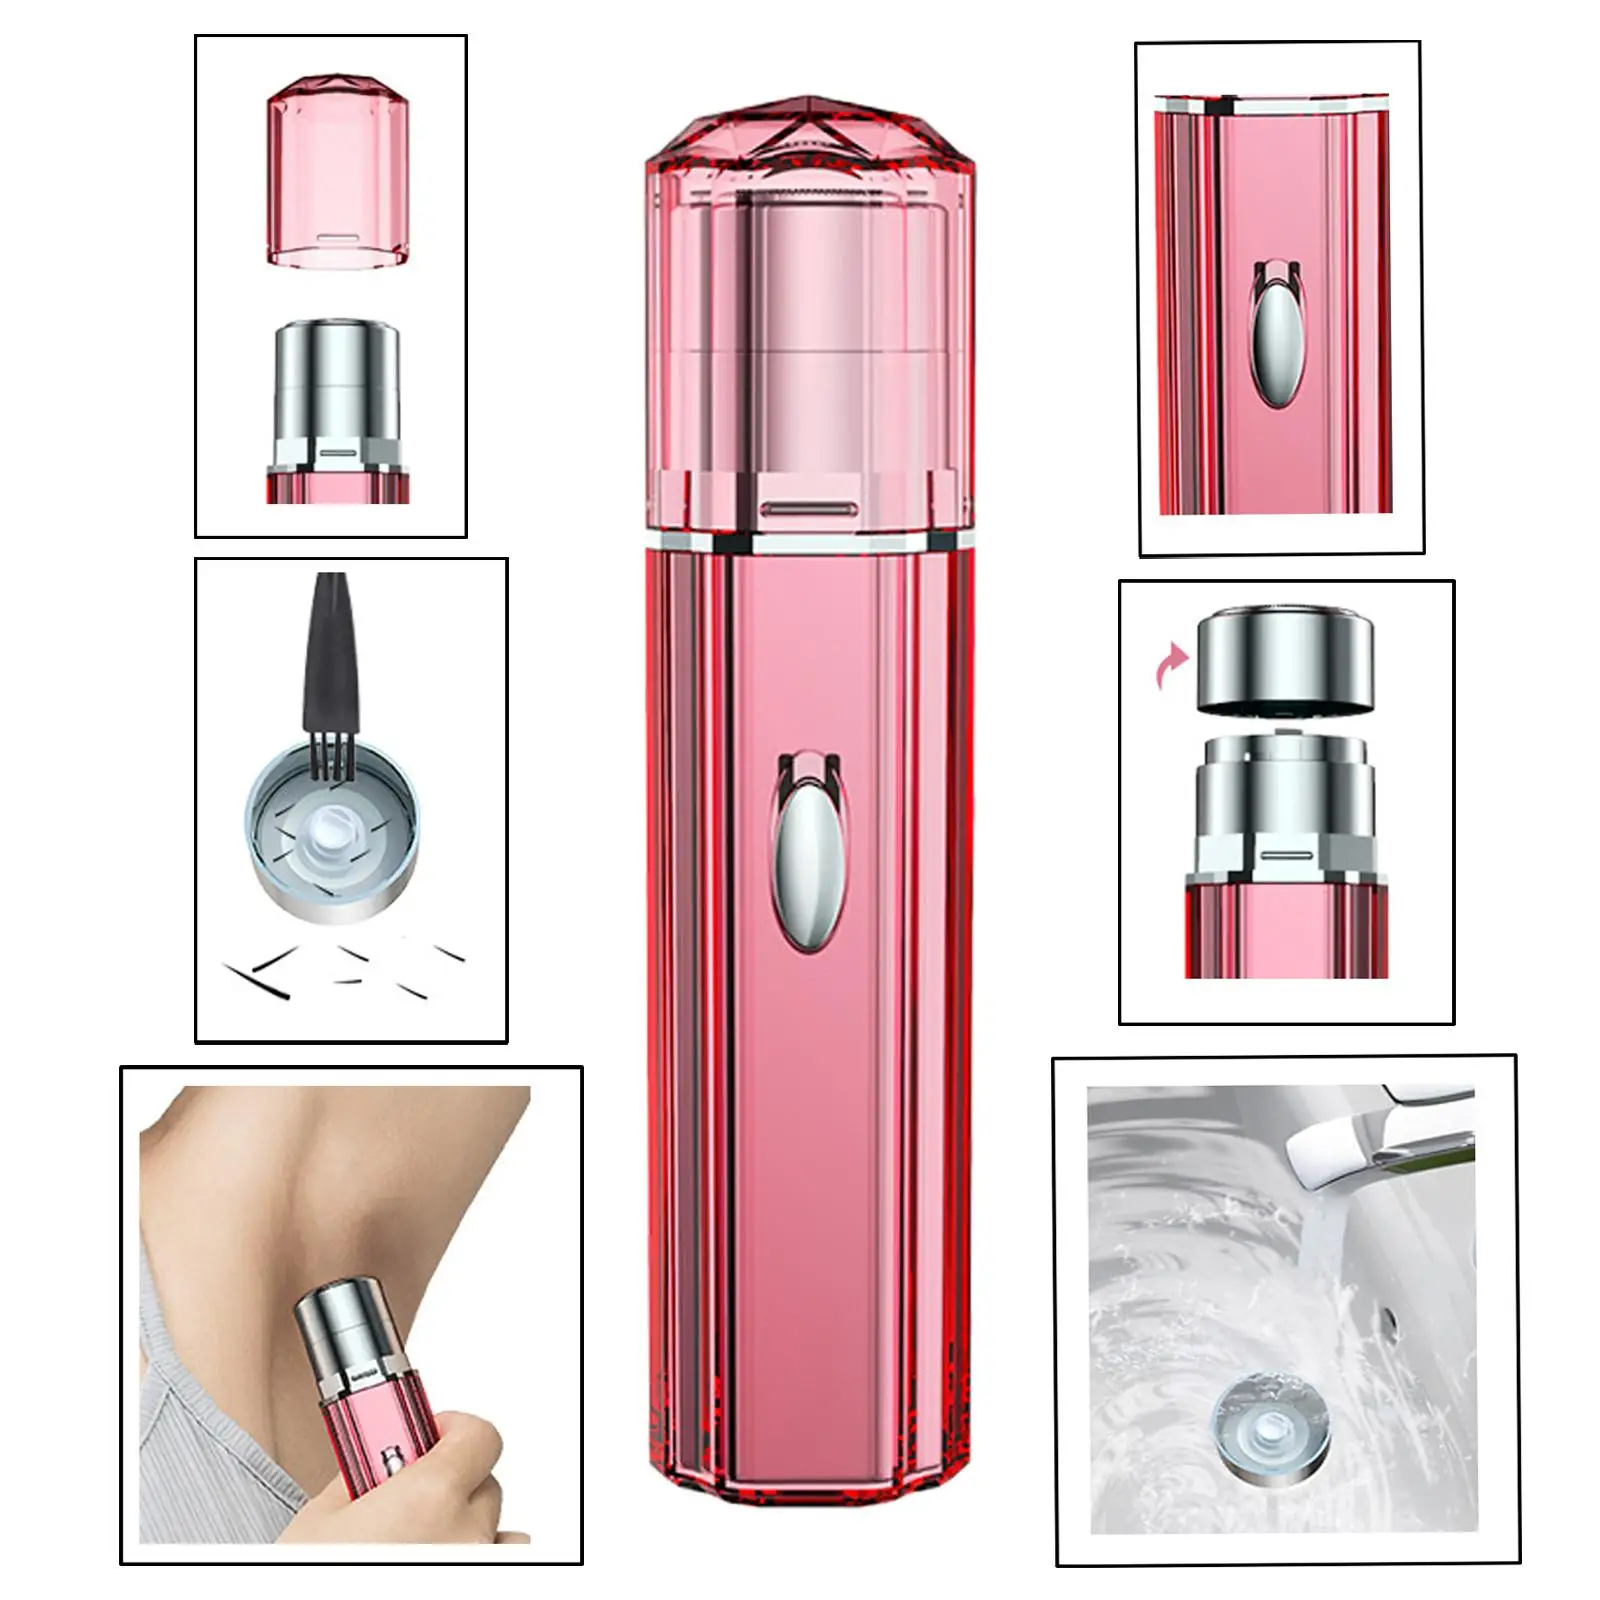 Portable Facial Hair Removal for Women Shaver Dual Rotating Blades Electric Epilator for Armpits Arms Legs Painless Gifts